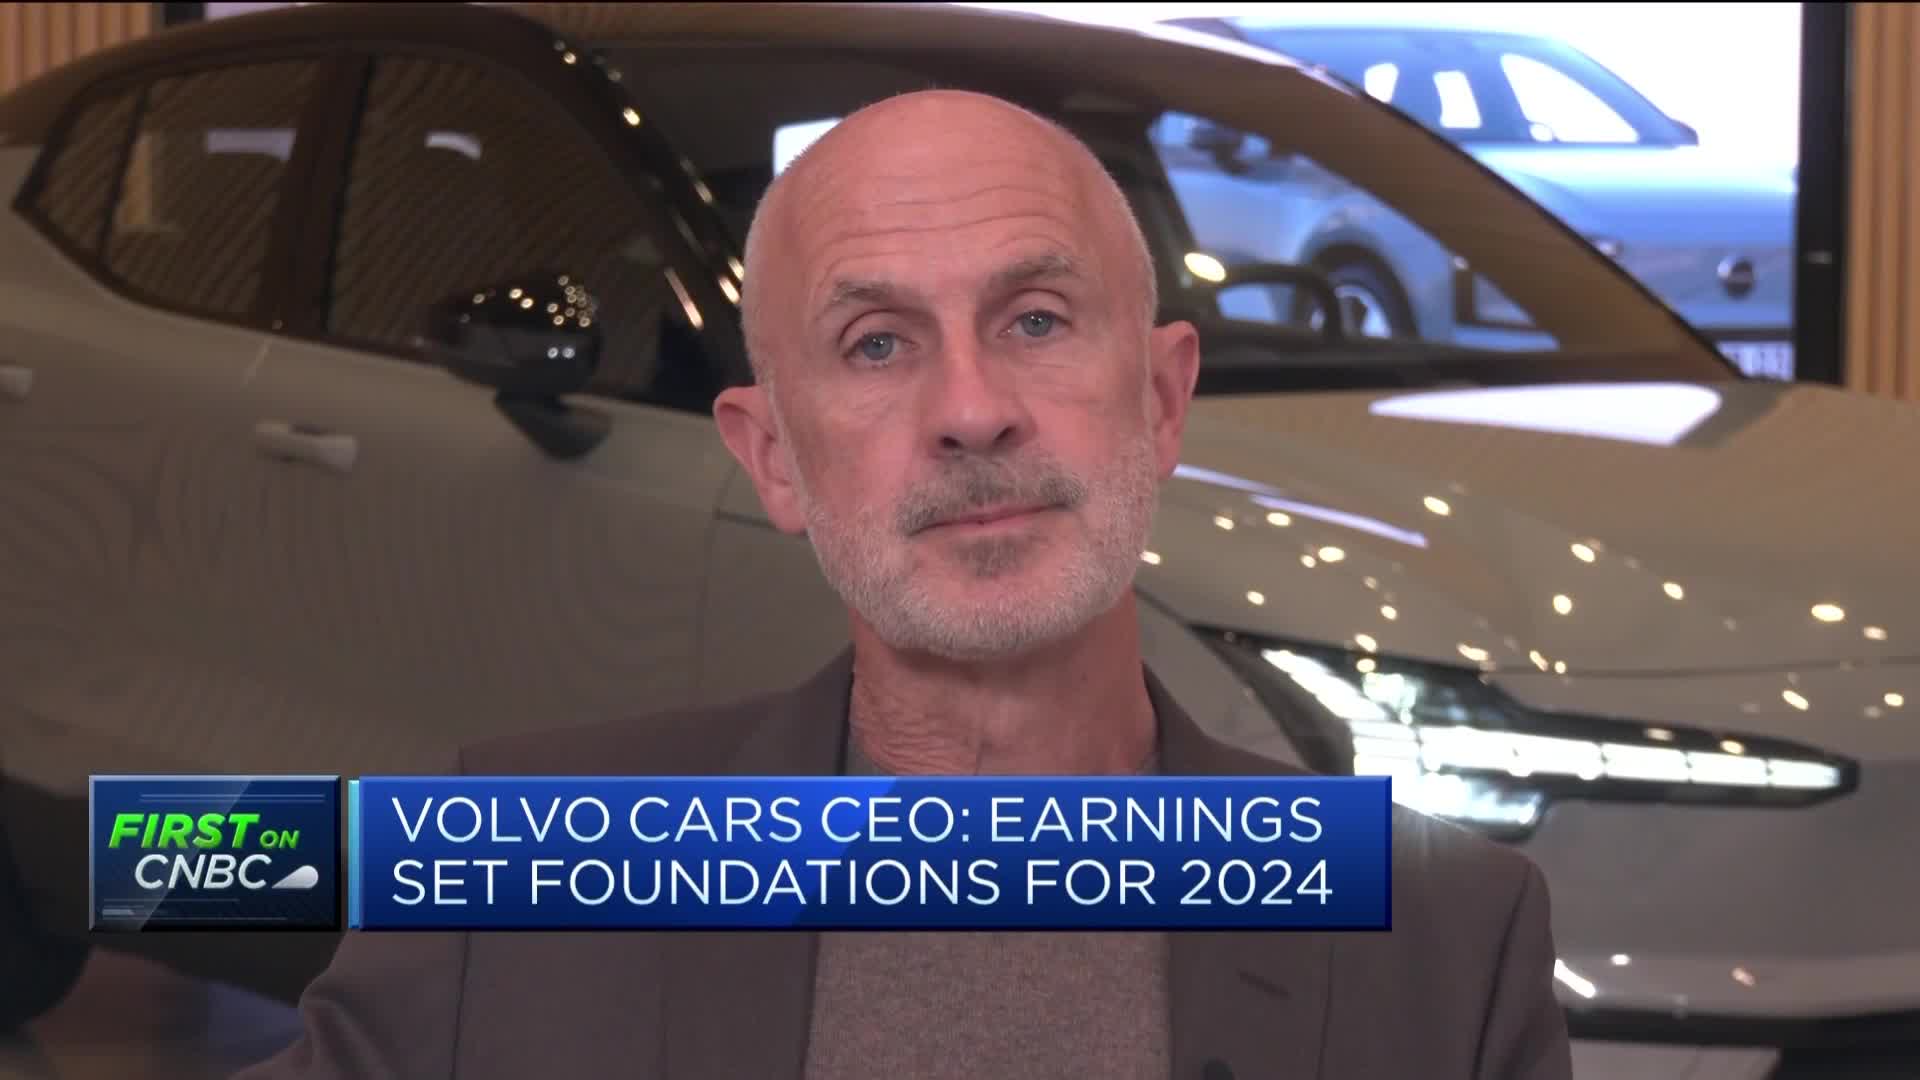 Volvo Cars CEO: Stopping Polestar funding is a 'natural evolution'